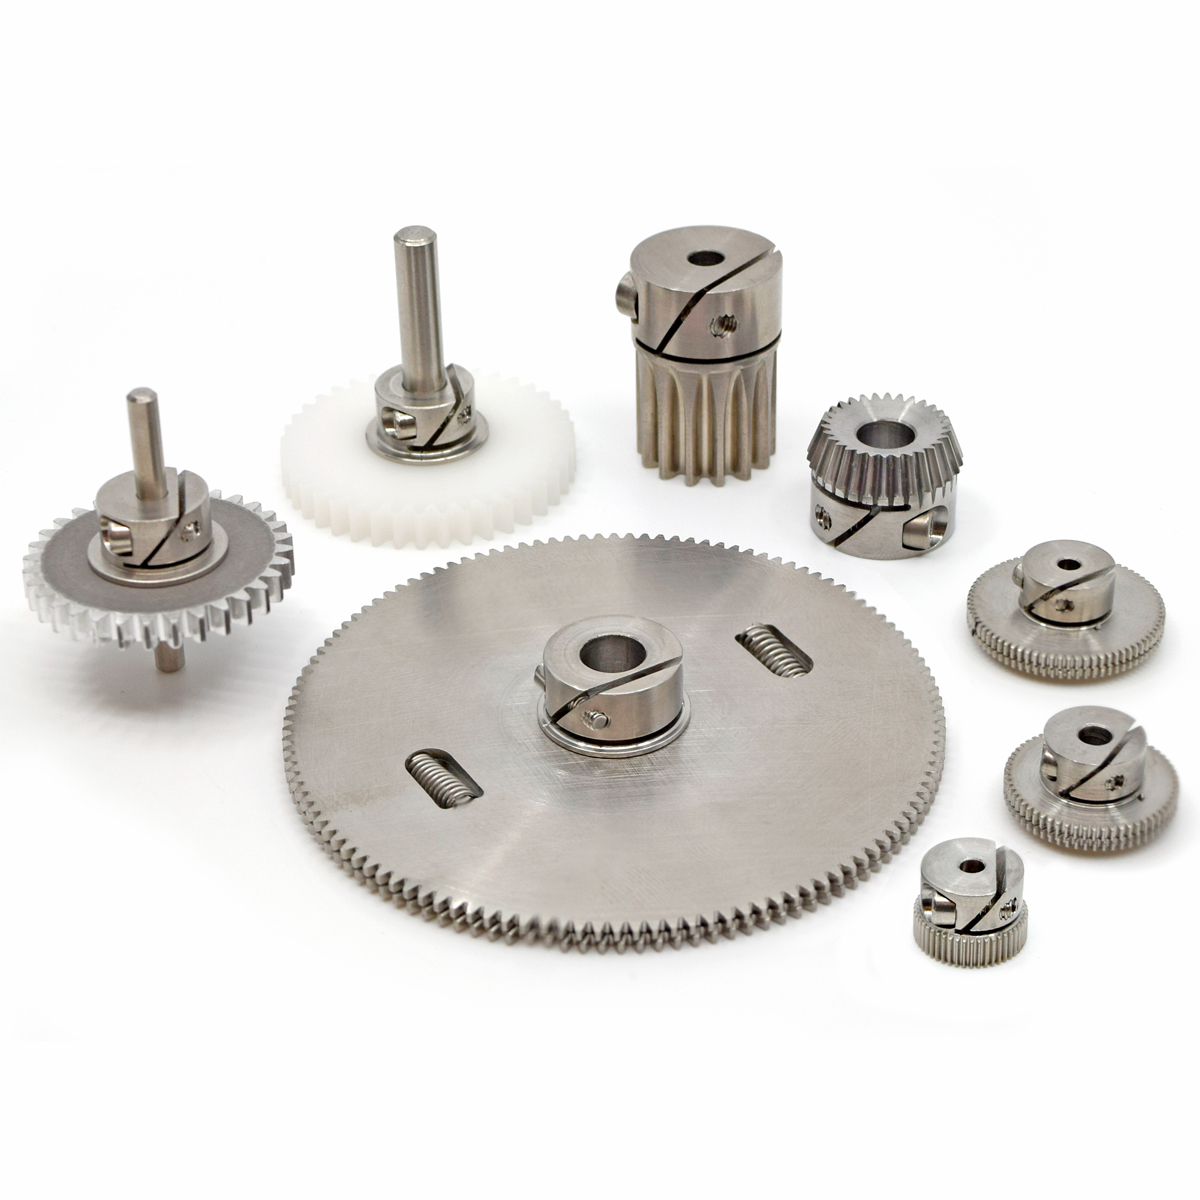 Custom and Stock Gears for Precision Applications